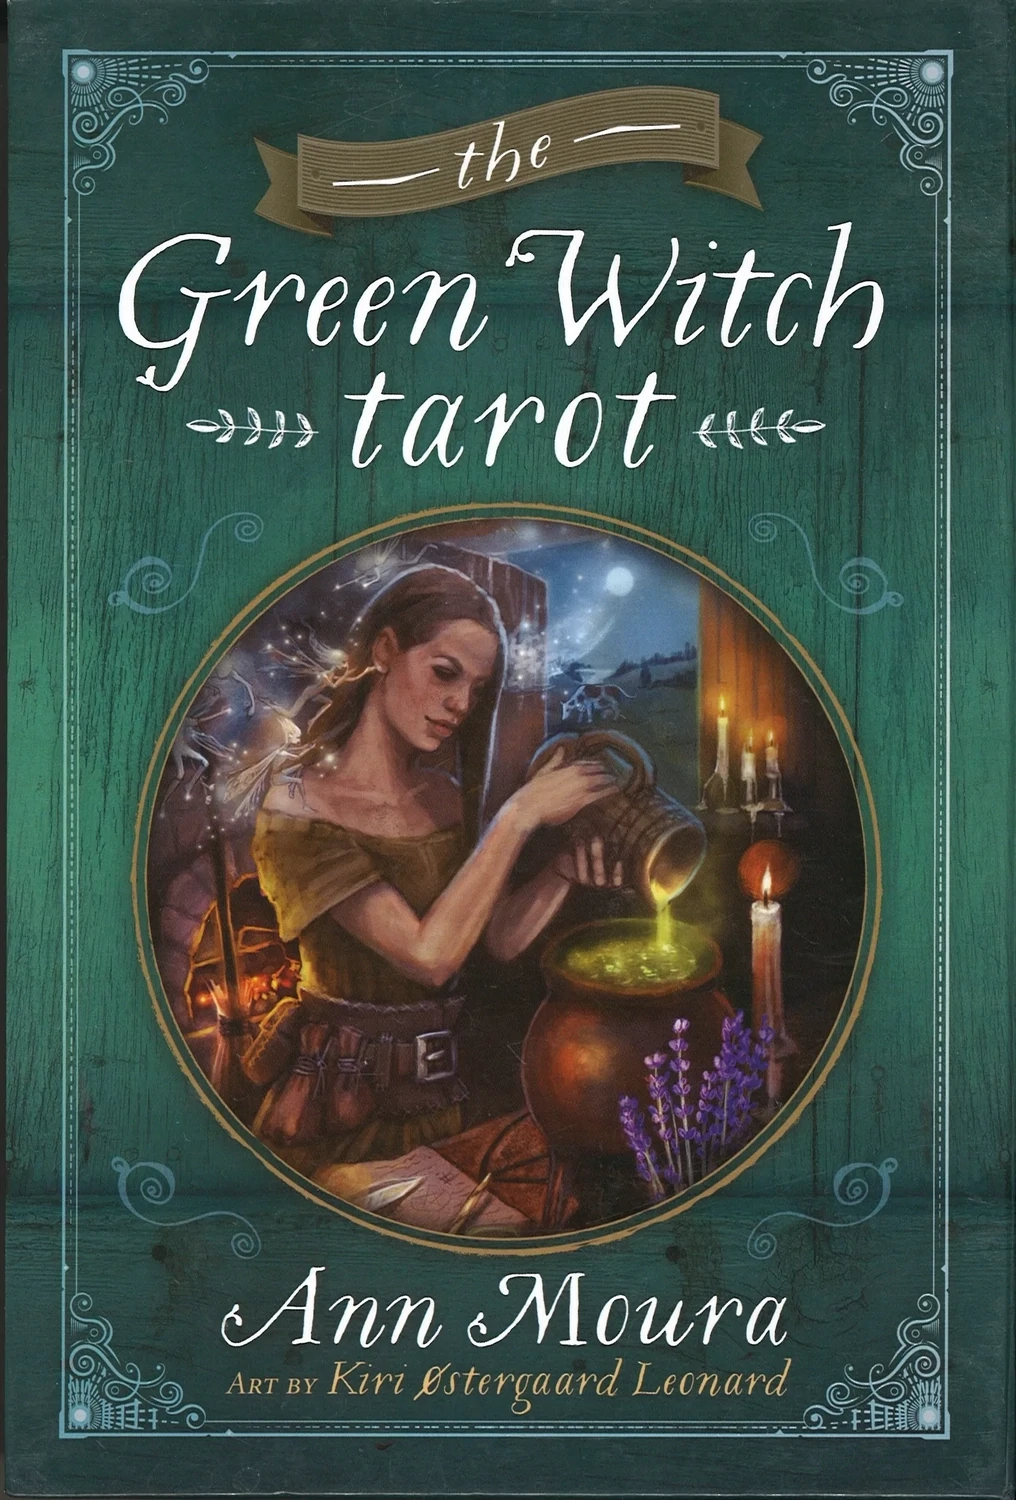 The Green Witch Tarot Cards